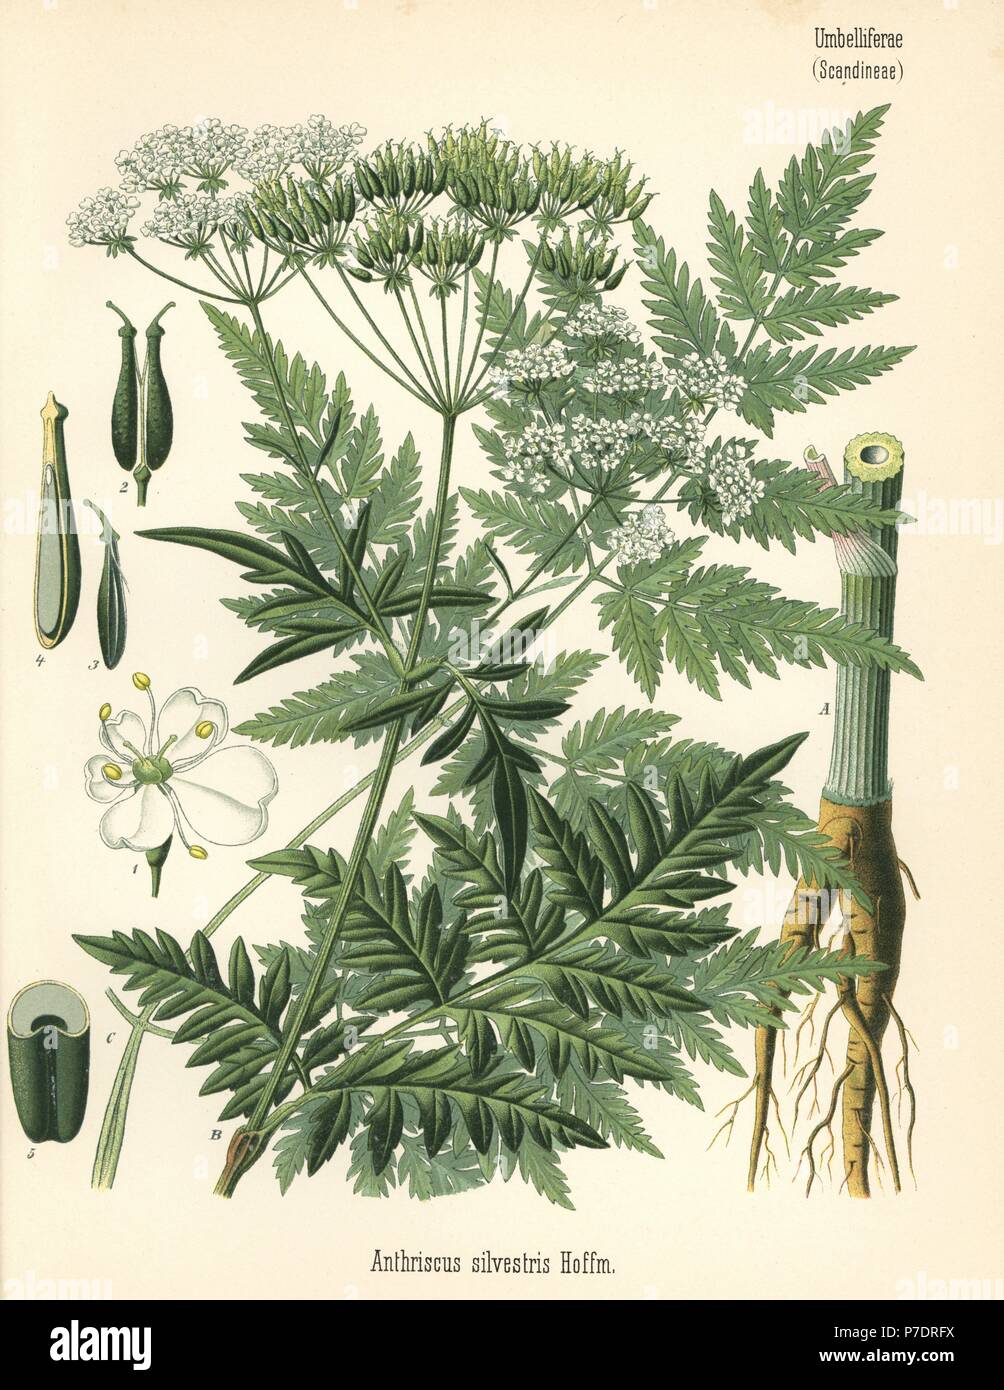 Cow parsley or wild chervil, Anthriscus sylvestris. Chromolithograph after a botanical illustration from Hermann Adolph Koehler's Medicinal Plants, edited by Gustav Pabst, Koehler, Germany, 1887. Stock Photo